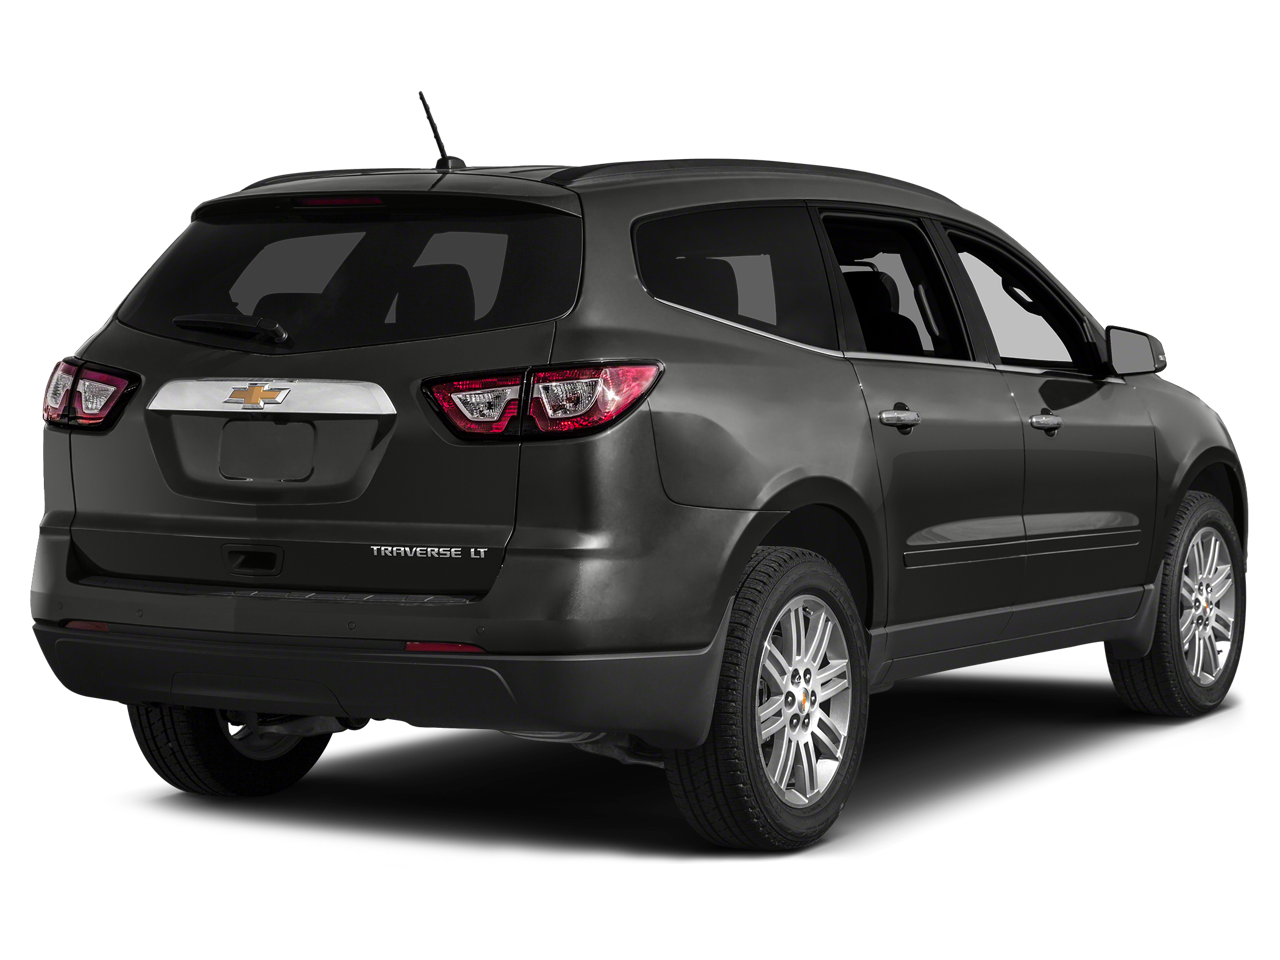 Used 2015 Chevrolet Traverse LS with VIN 1GNKVFED1FJ117265 for sale in Blackfoot, ID